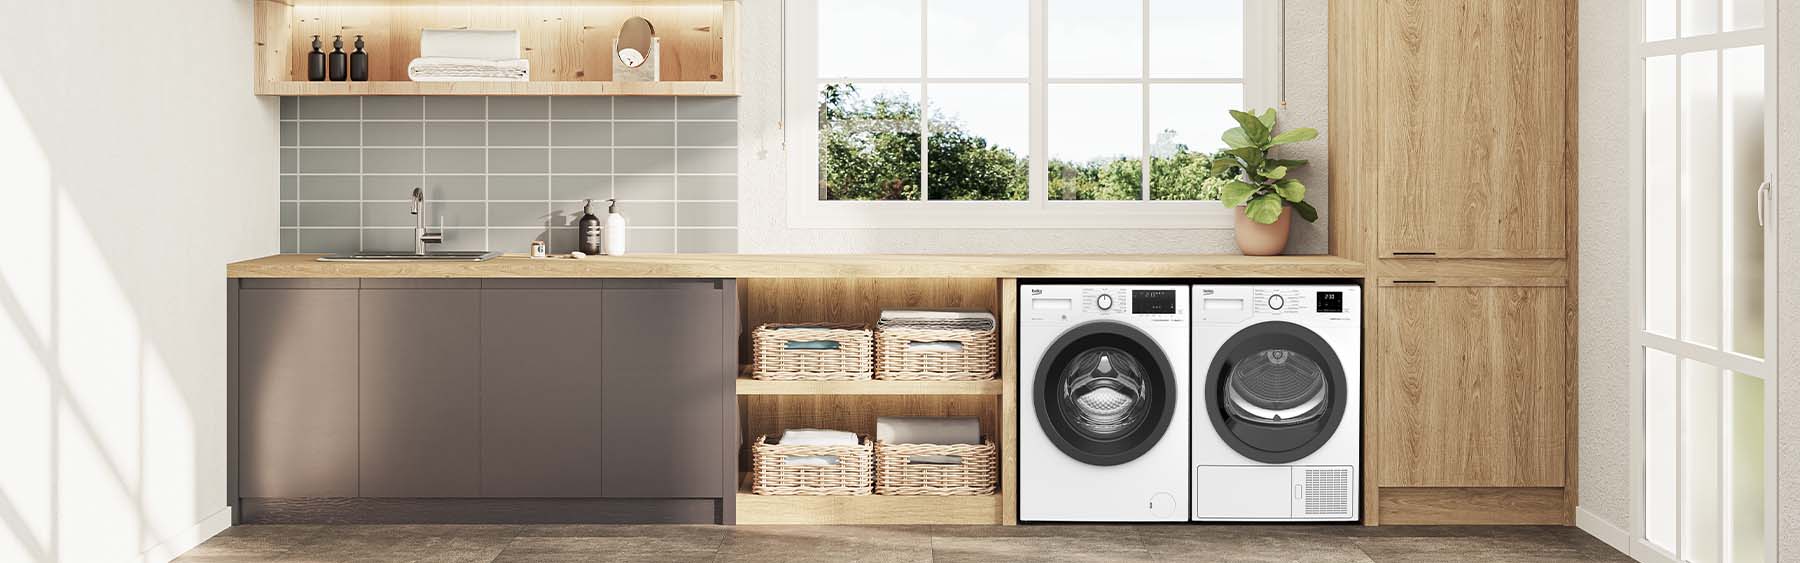 5 Things To Know Before Buying A Washing Machine